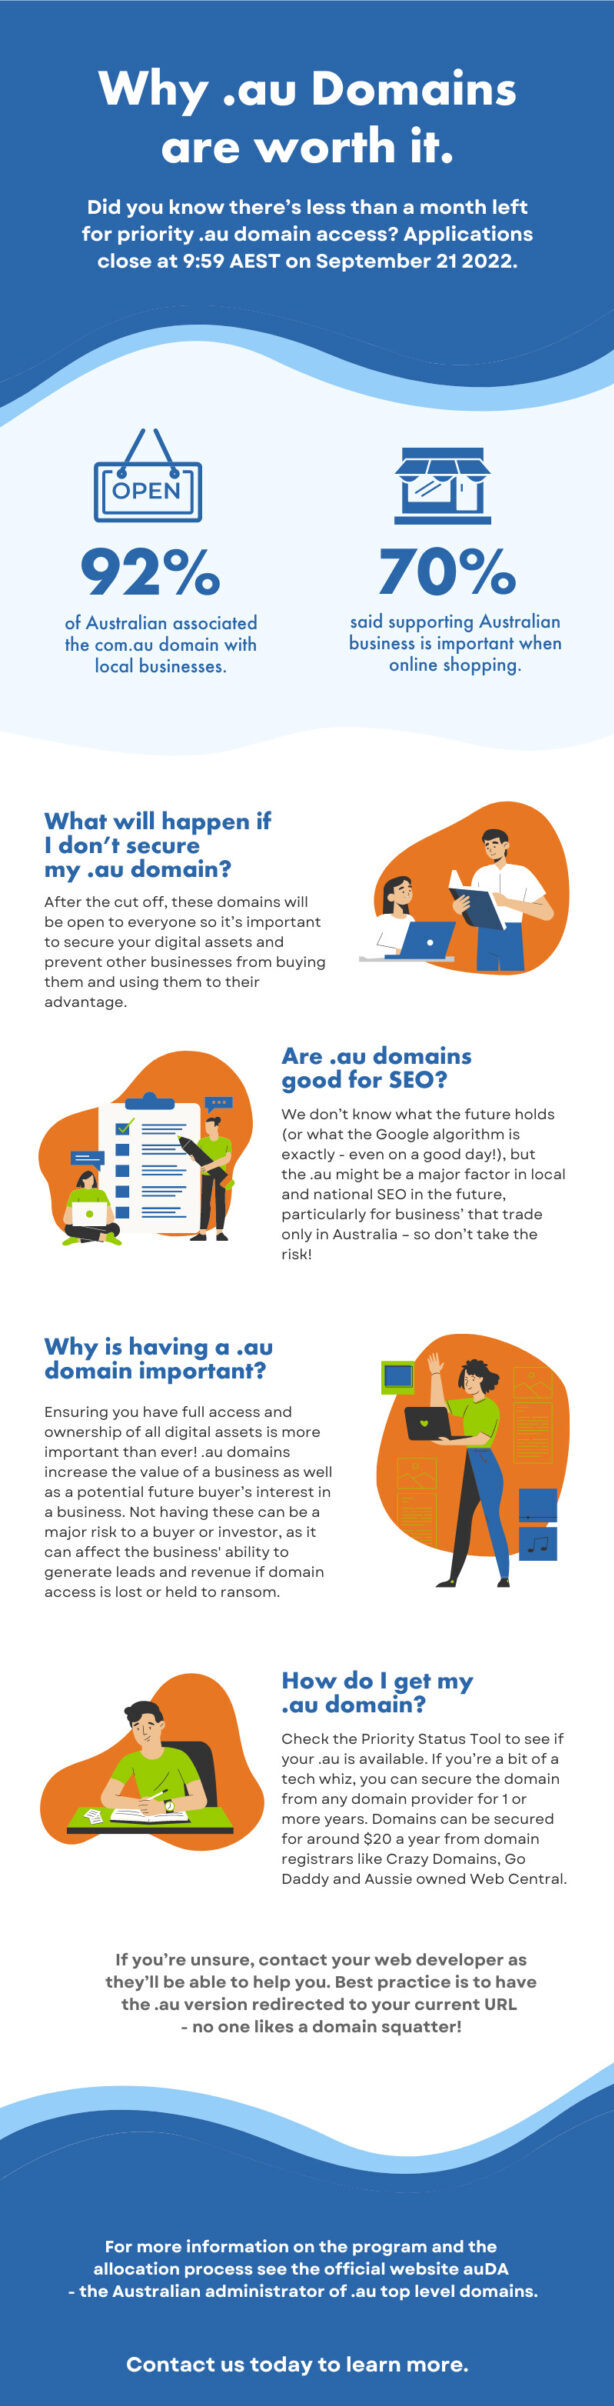 Why au. Domains Are Worth It